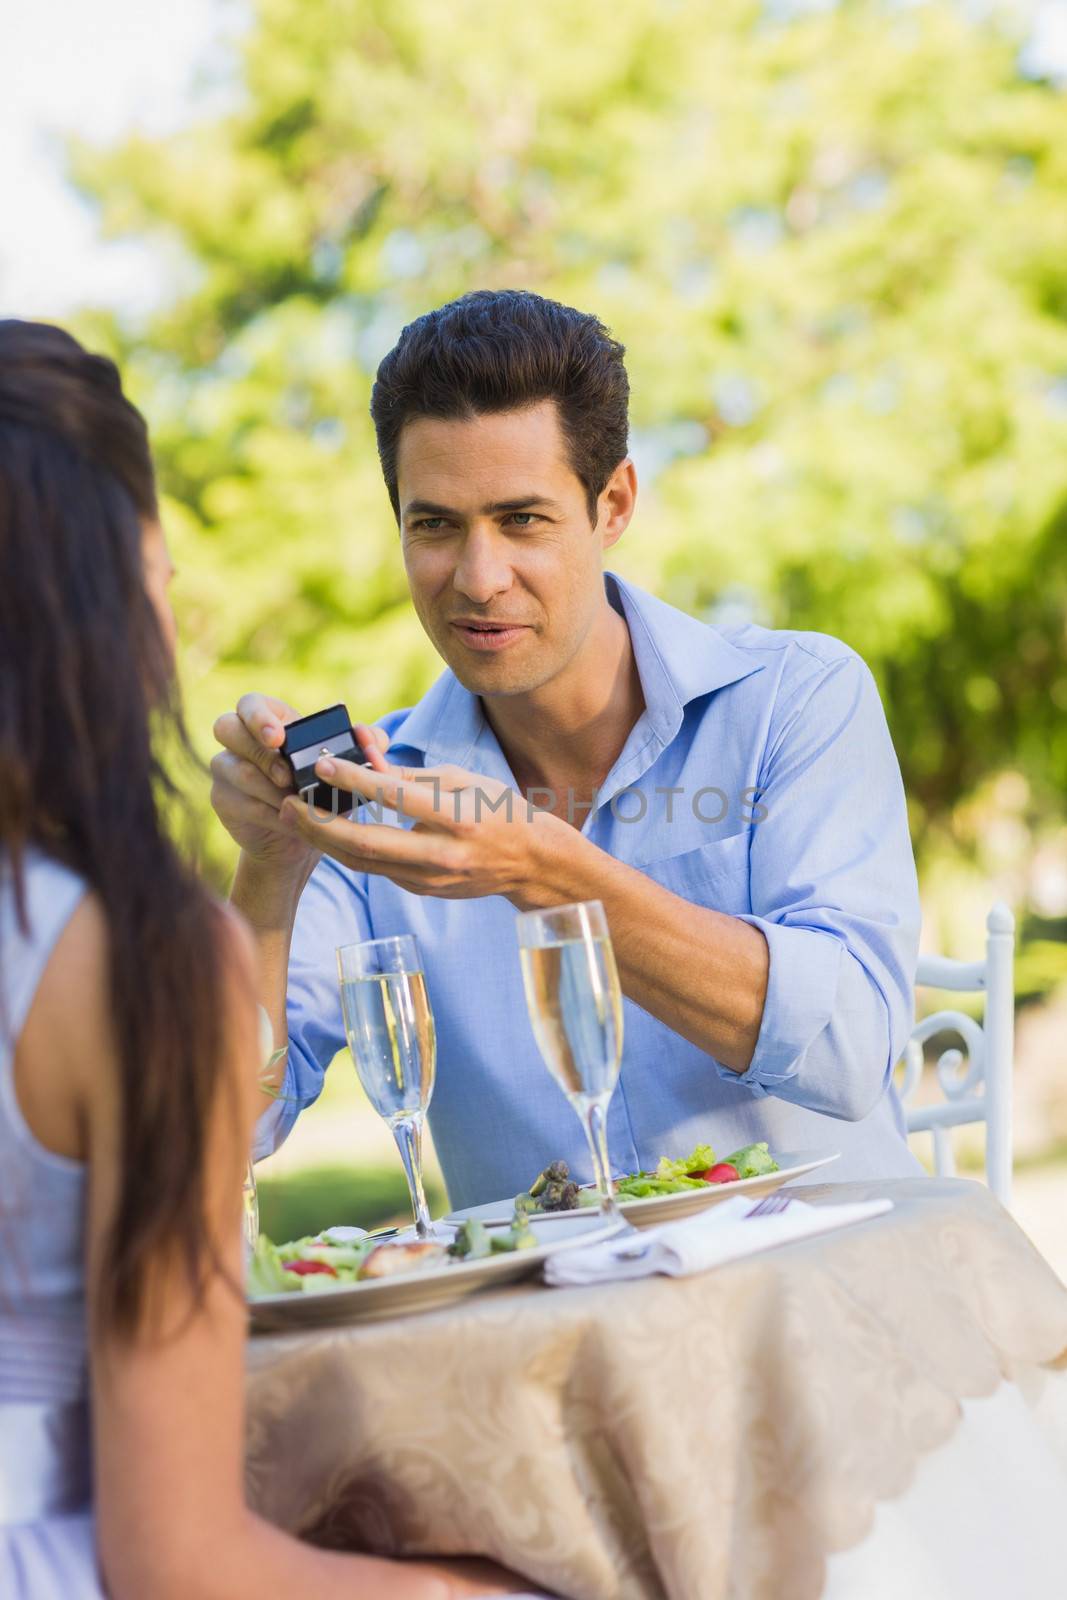 Man proposing a woman while they have a romantic date at an outdoor caf├®